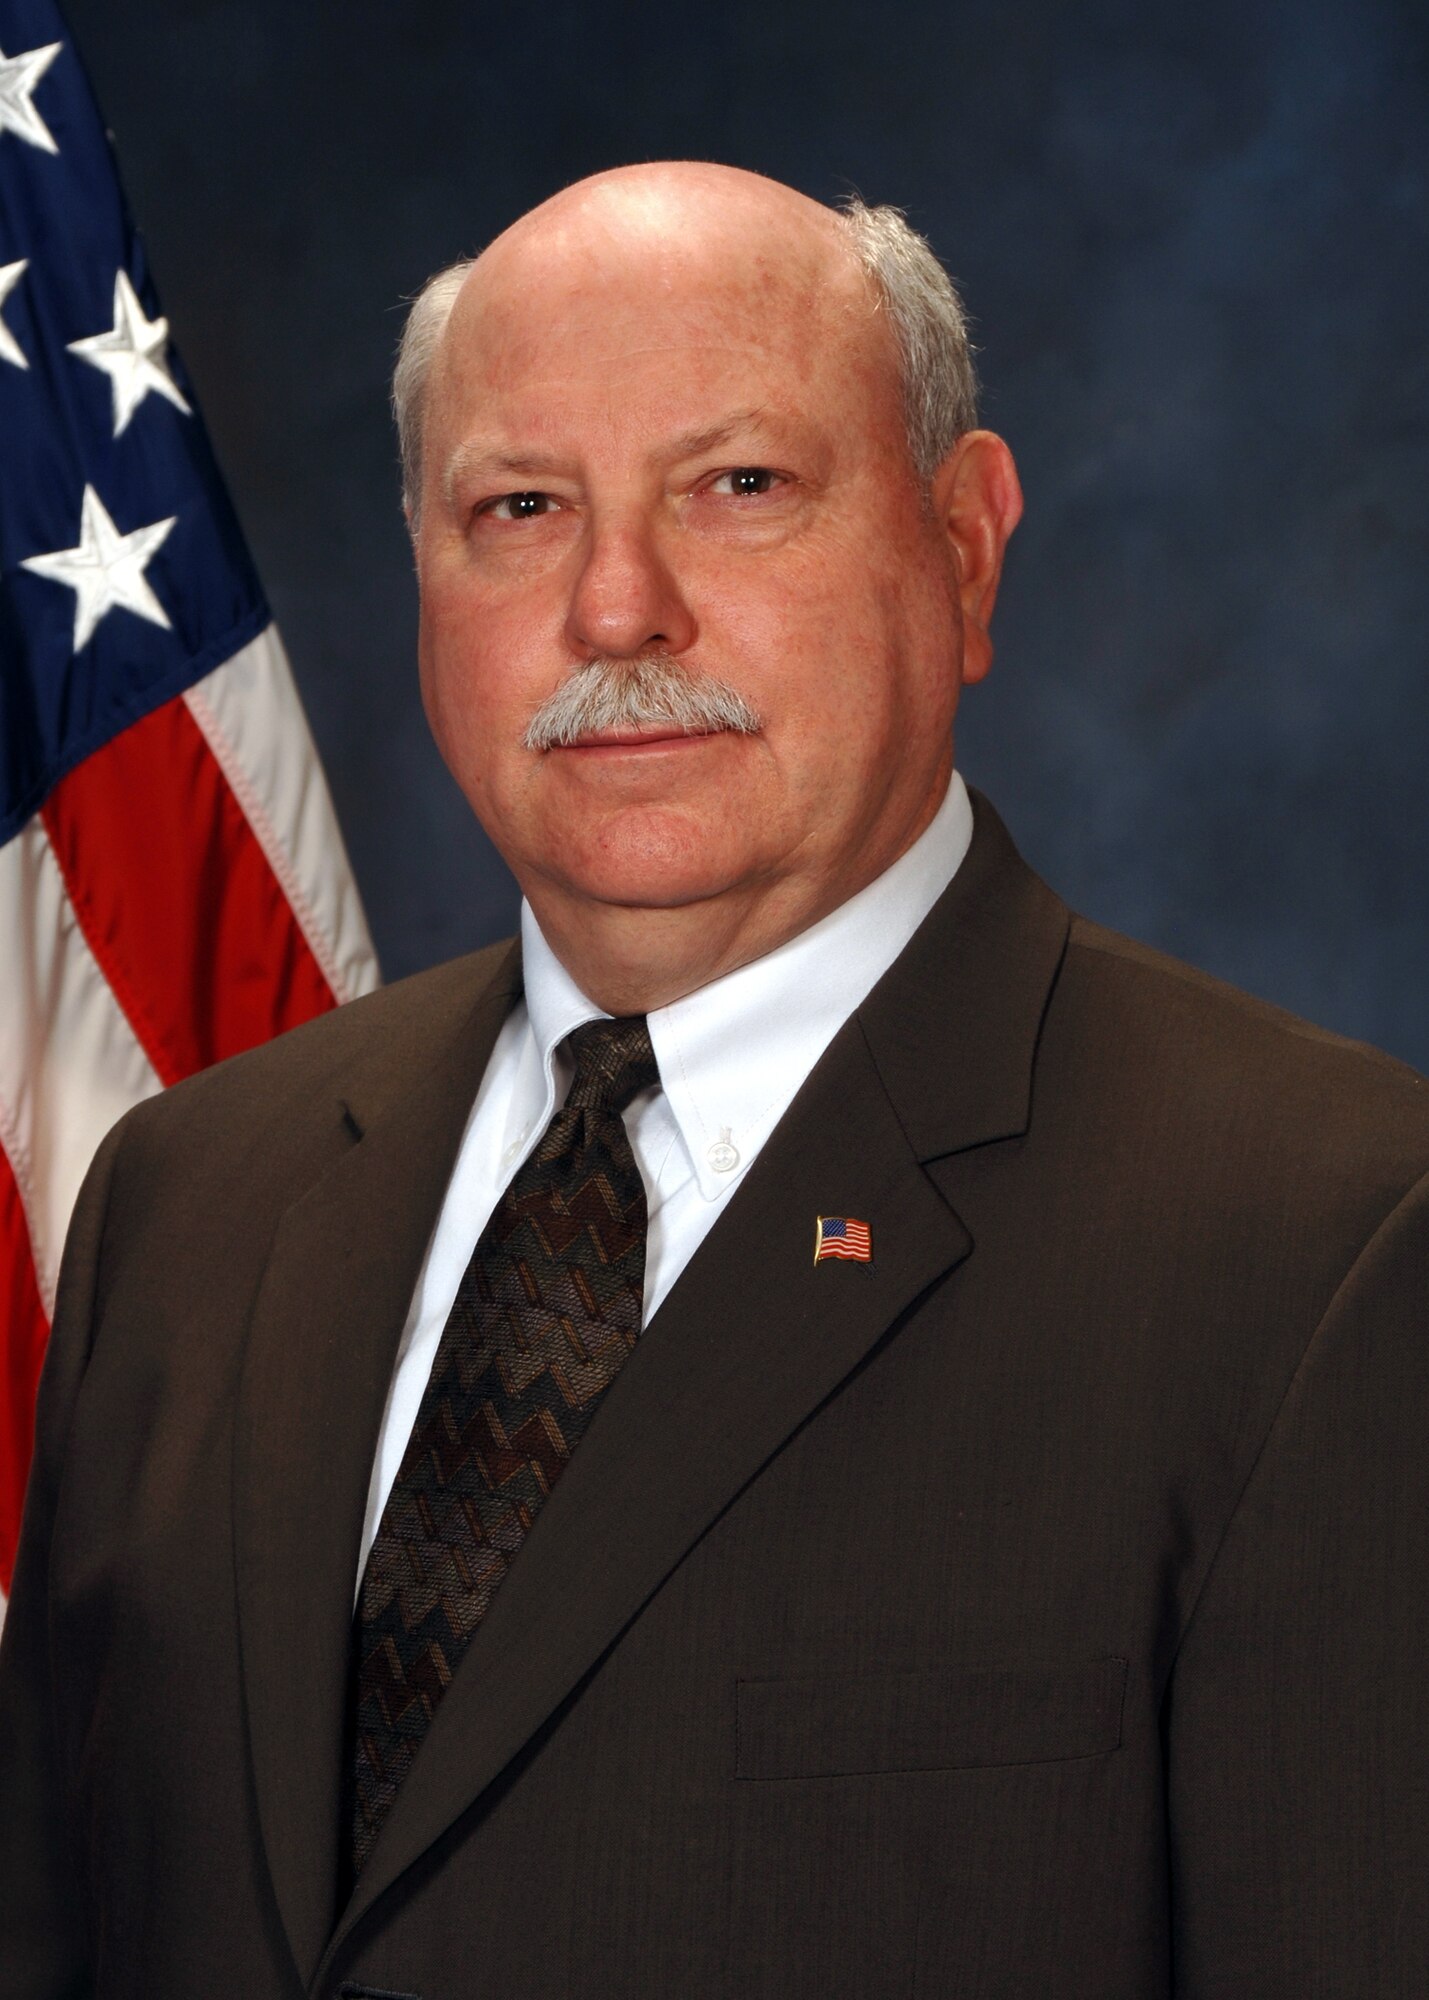 Lawrence Fielding, former technical director for the Aeronautical Systems Center's C-17 Globemaster III program at Wright-Patterson Air Force Base, Ohio, has won a Department of Defense Distinguished Civilian Service Award for 2006.  (U.S. Air Force photo)
